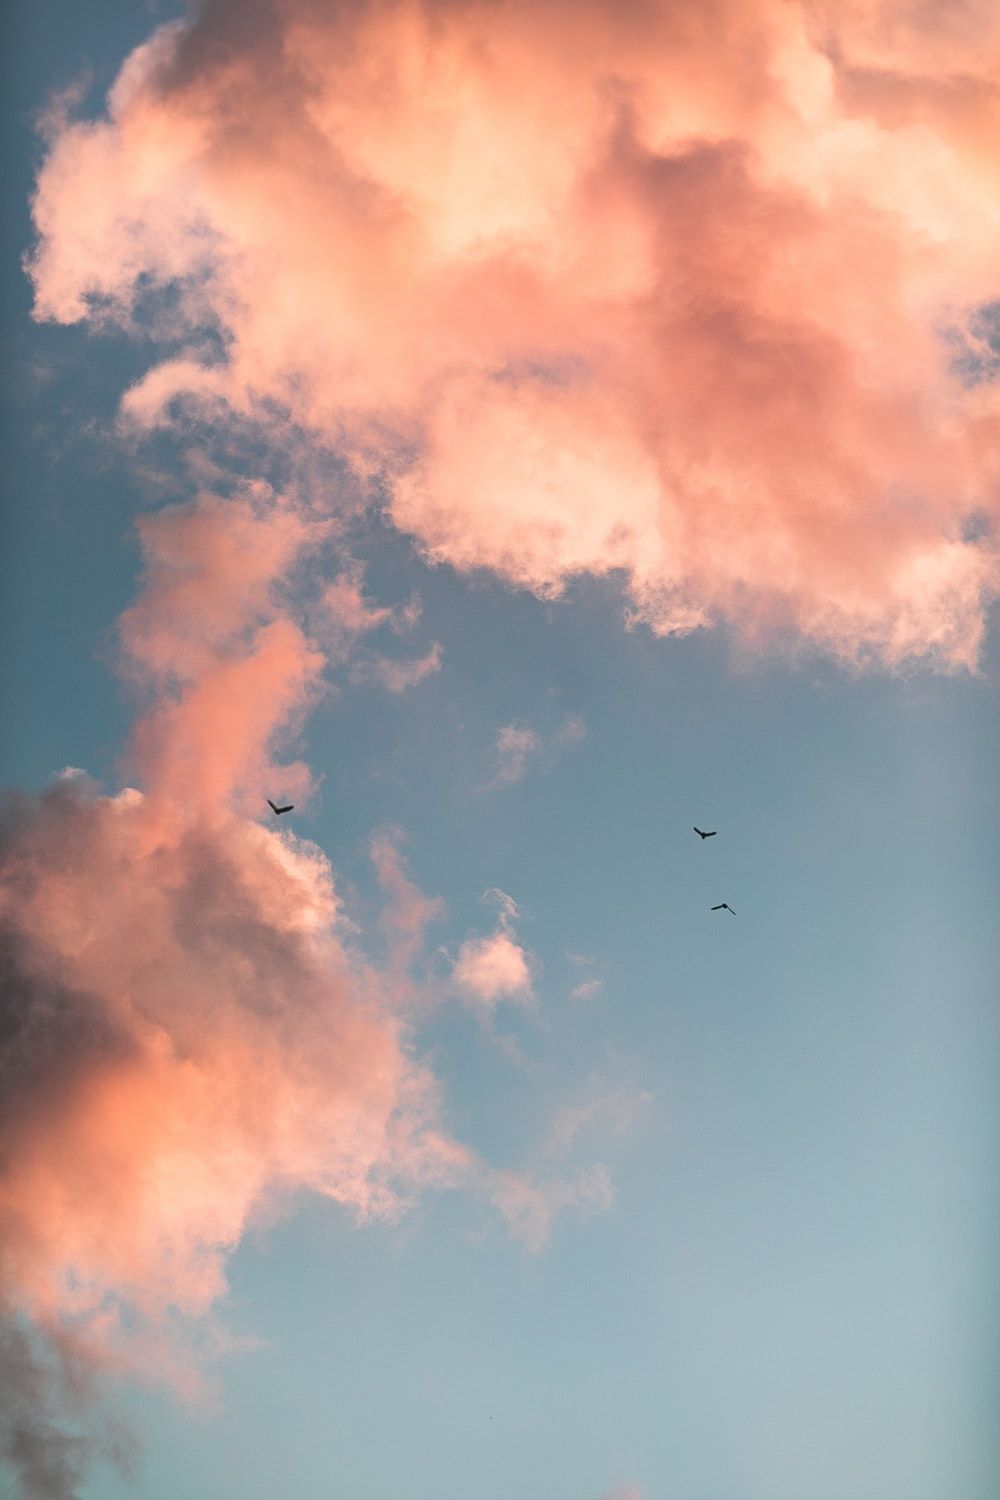 Cotton Candy Clouds Picture. Download Free Image